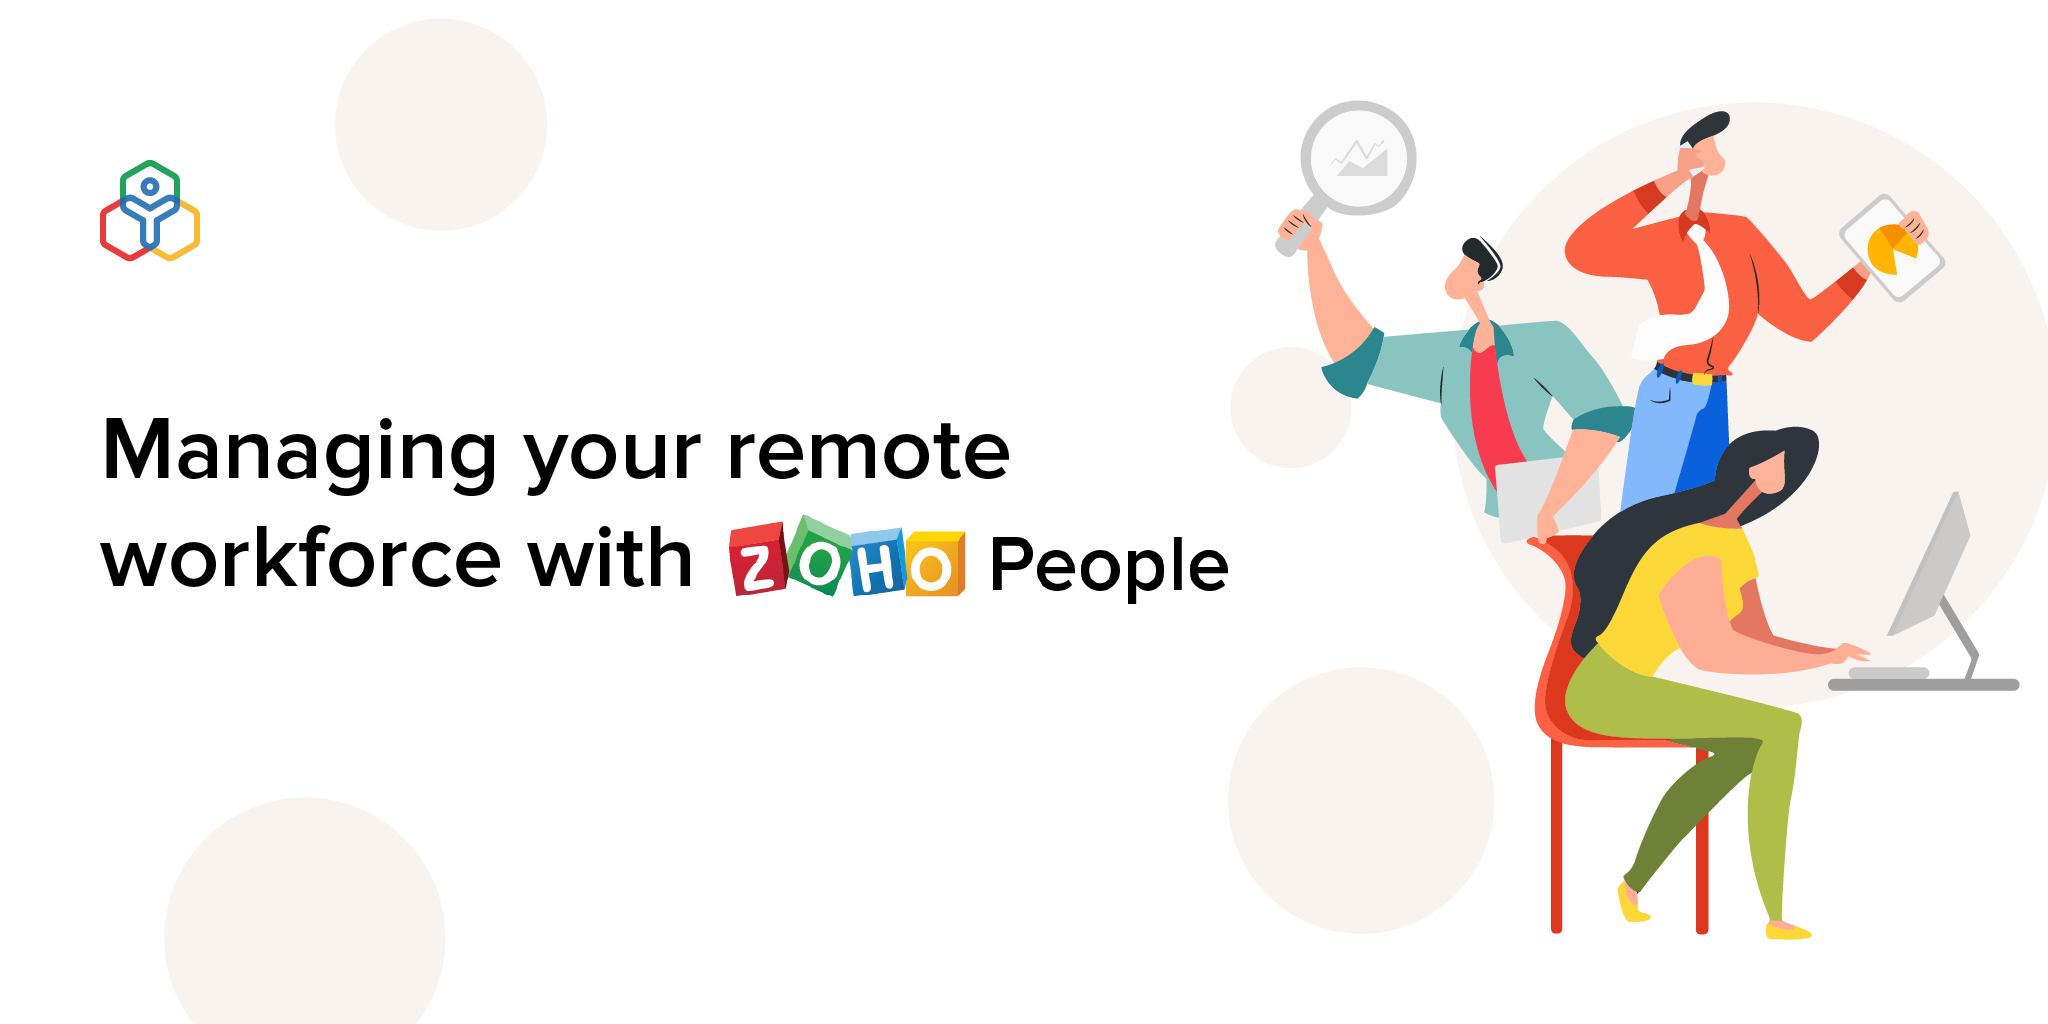 Here's how Zoho People eases remote workforce management